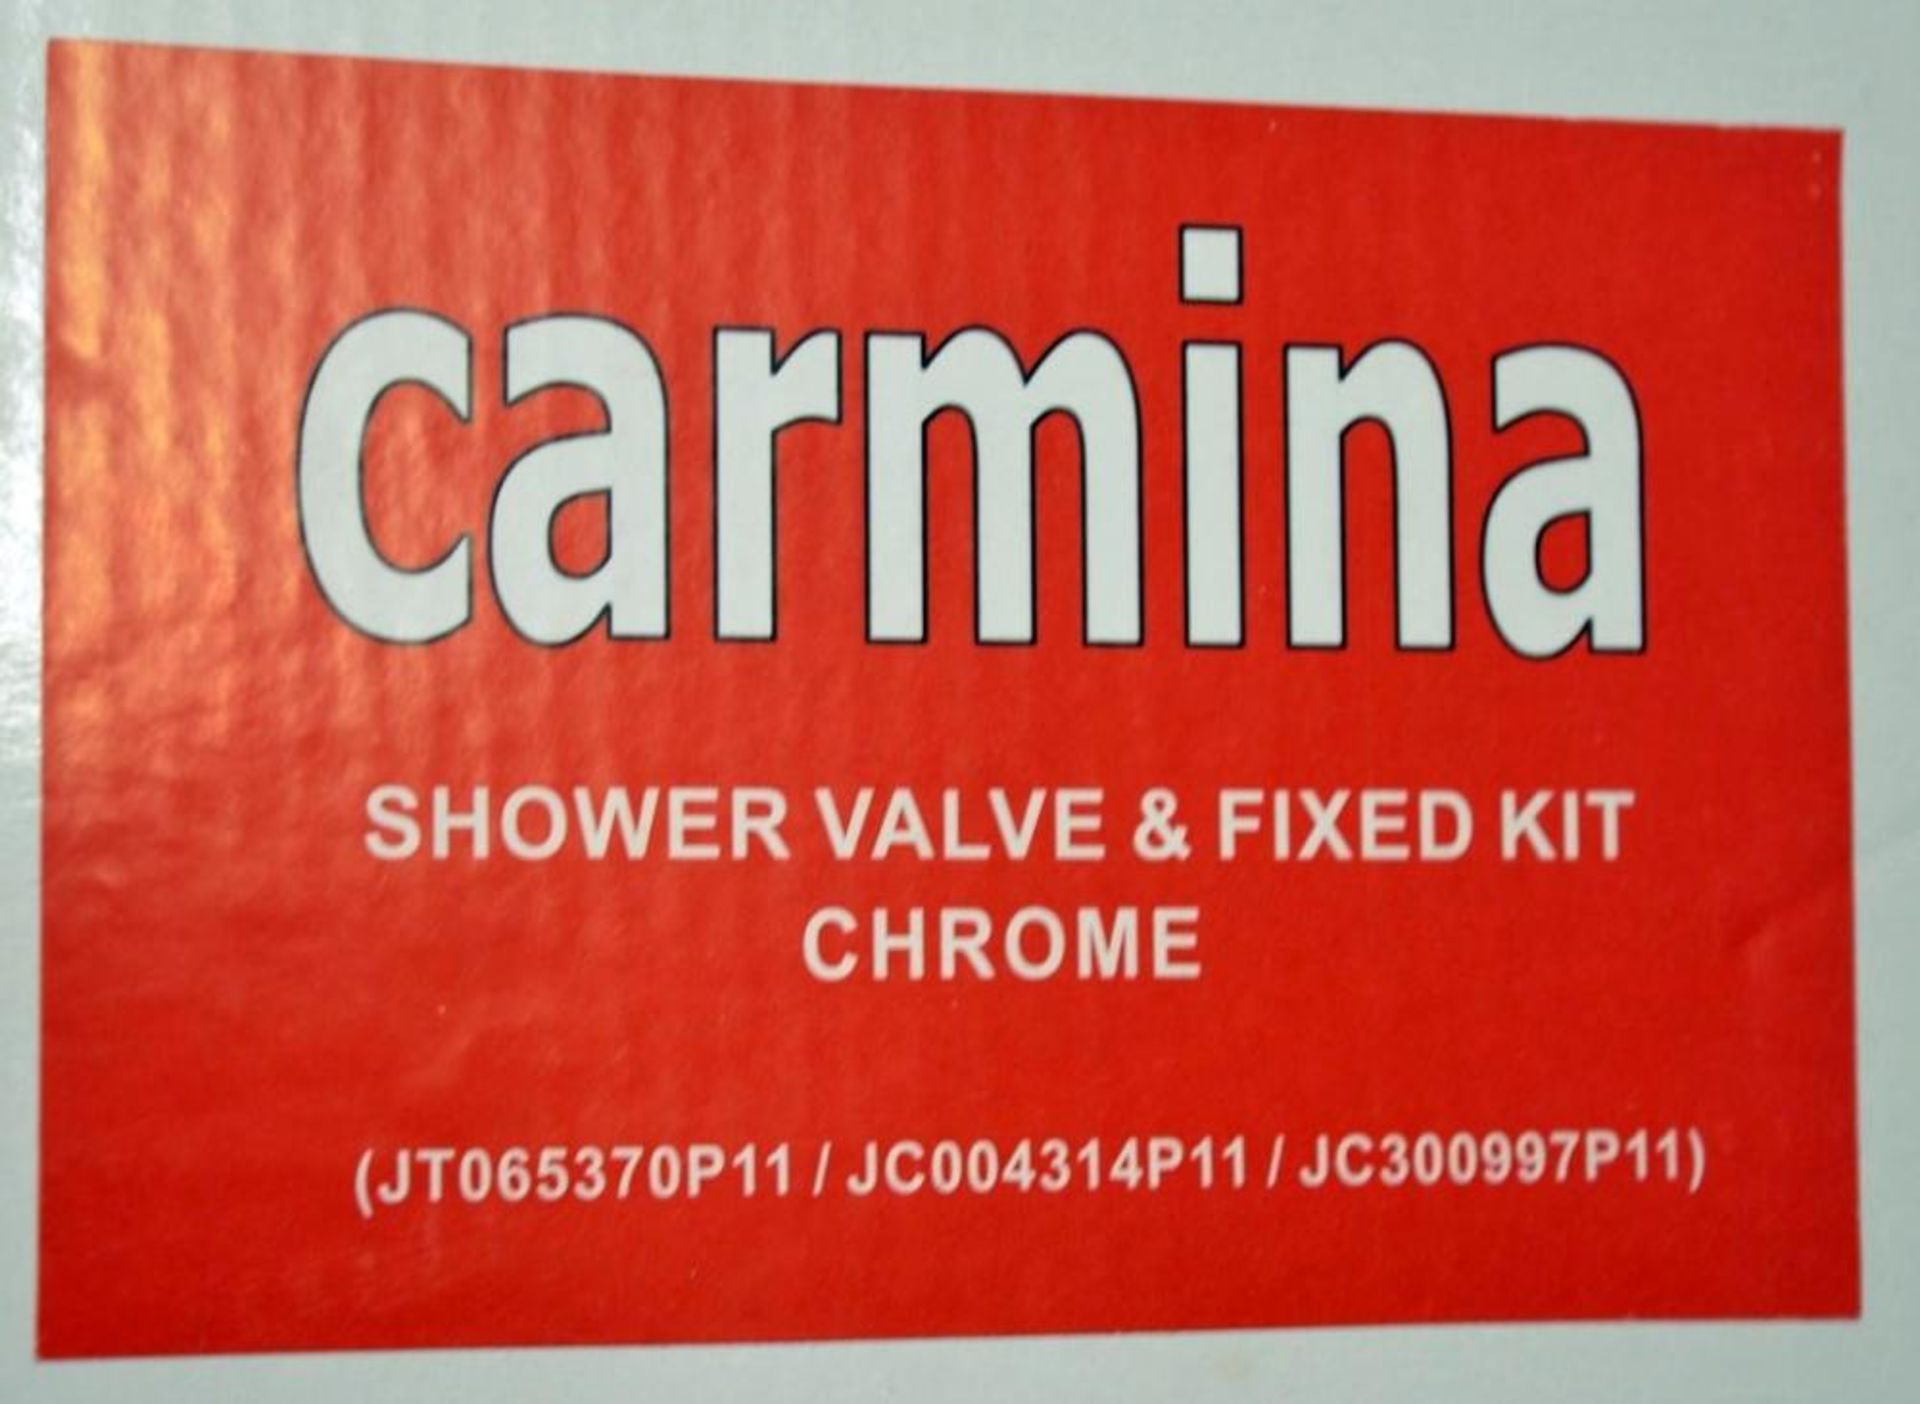 6 x Carmina Shower Valve Kits - Contains Chrome Shower Head, Fixed Arm and Manual Control - Brass Co - Image 4 of 13